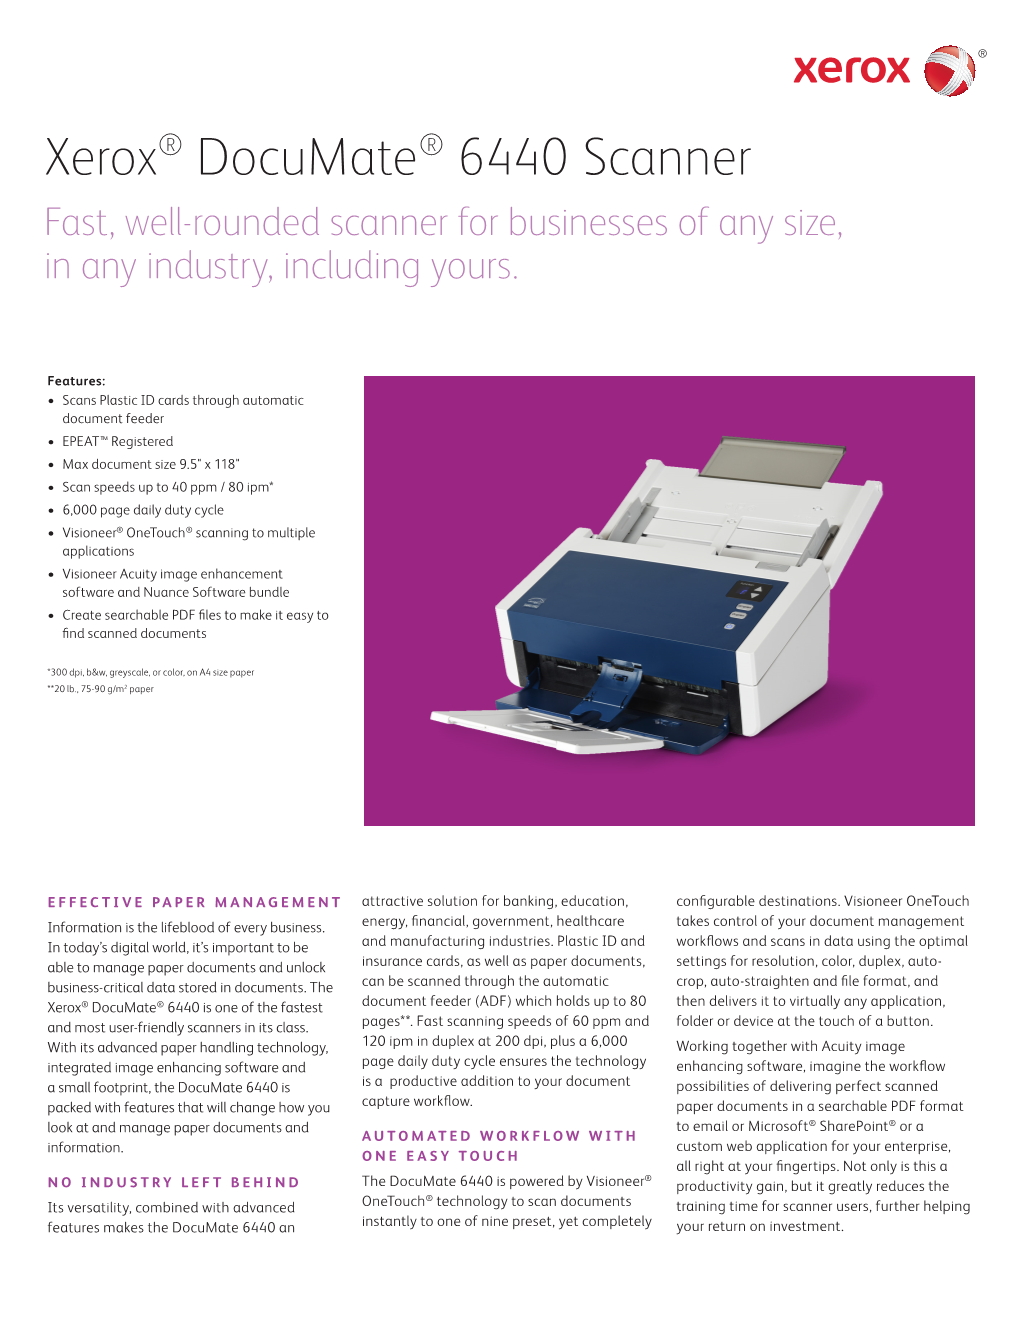 Xerox® Documate® 6440 Scanner Fast, Well-Rounded Scanner for Businesses of Any Size, in Any Industry, Including Yours